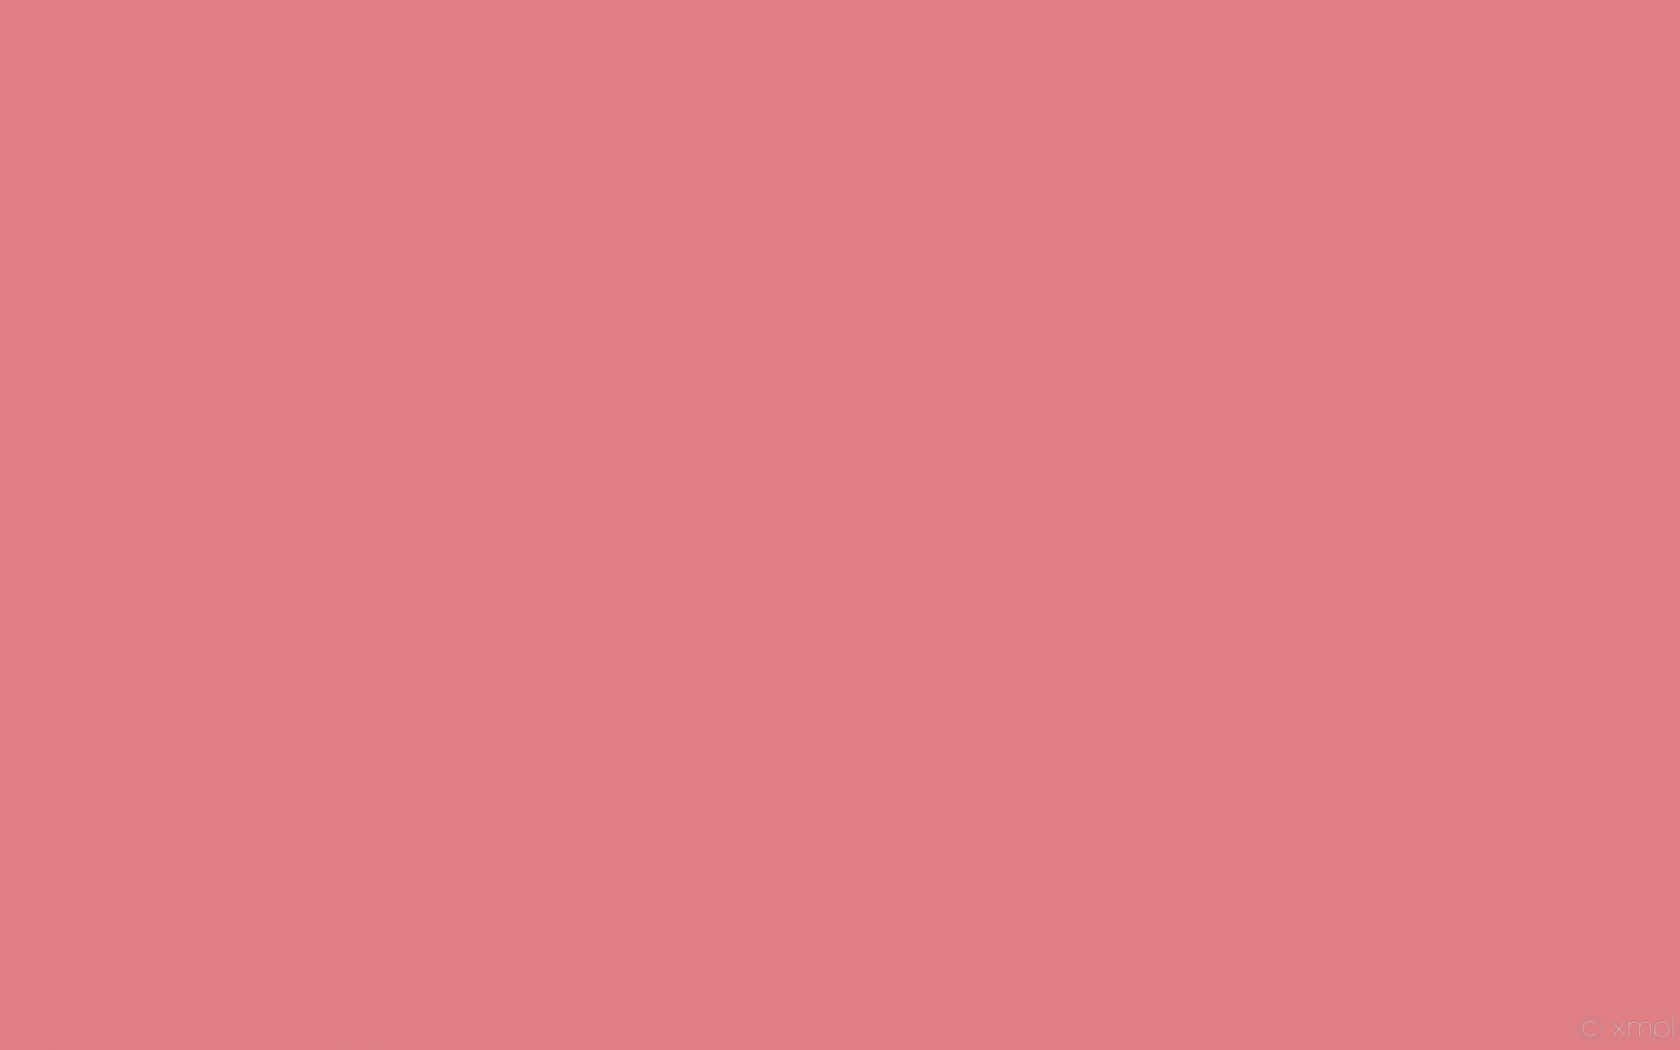 A Bright, Beautiful Pink Solid Background